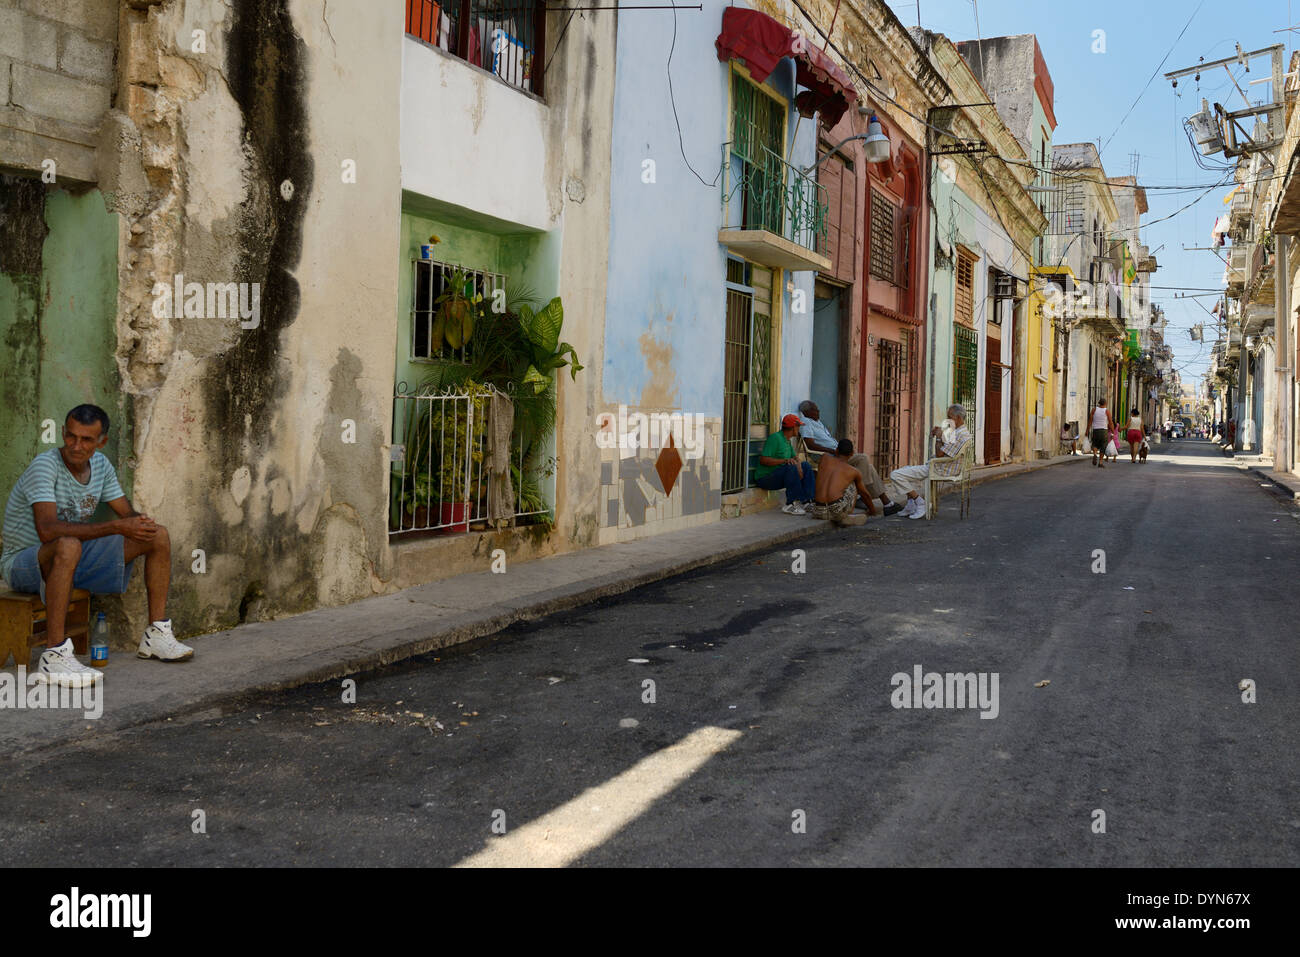 Local cubans lounging and walking in a street of Old Havana Cuba Stock Photo